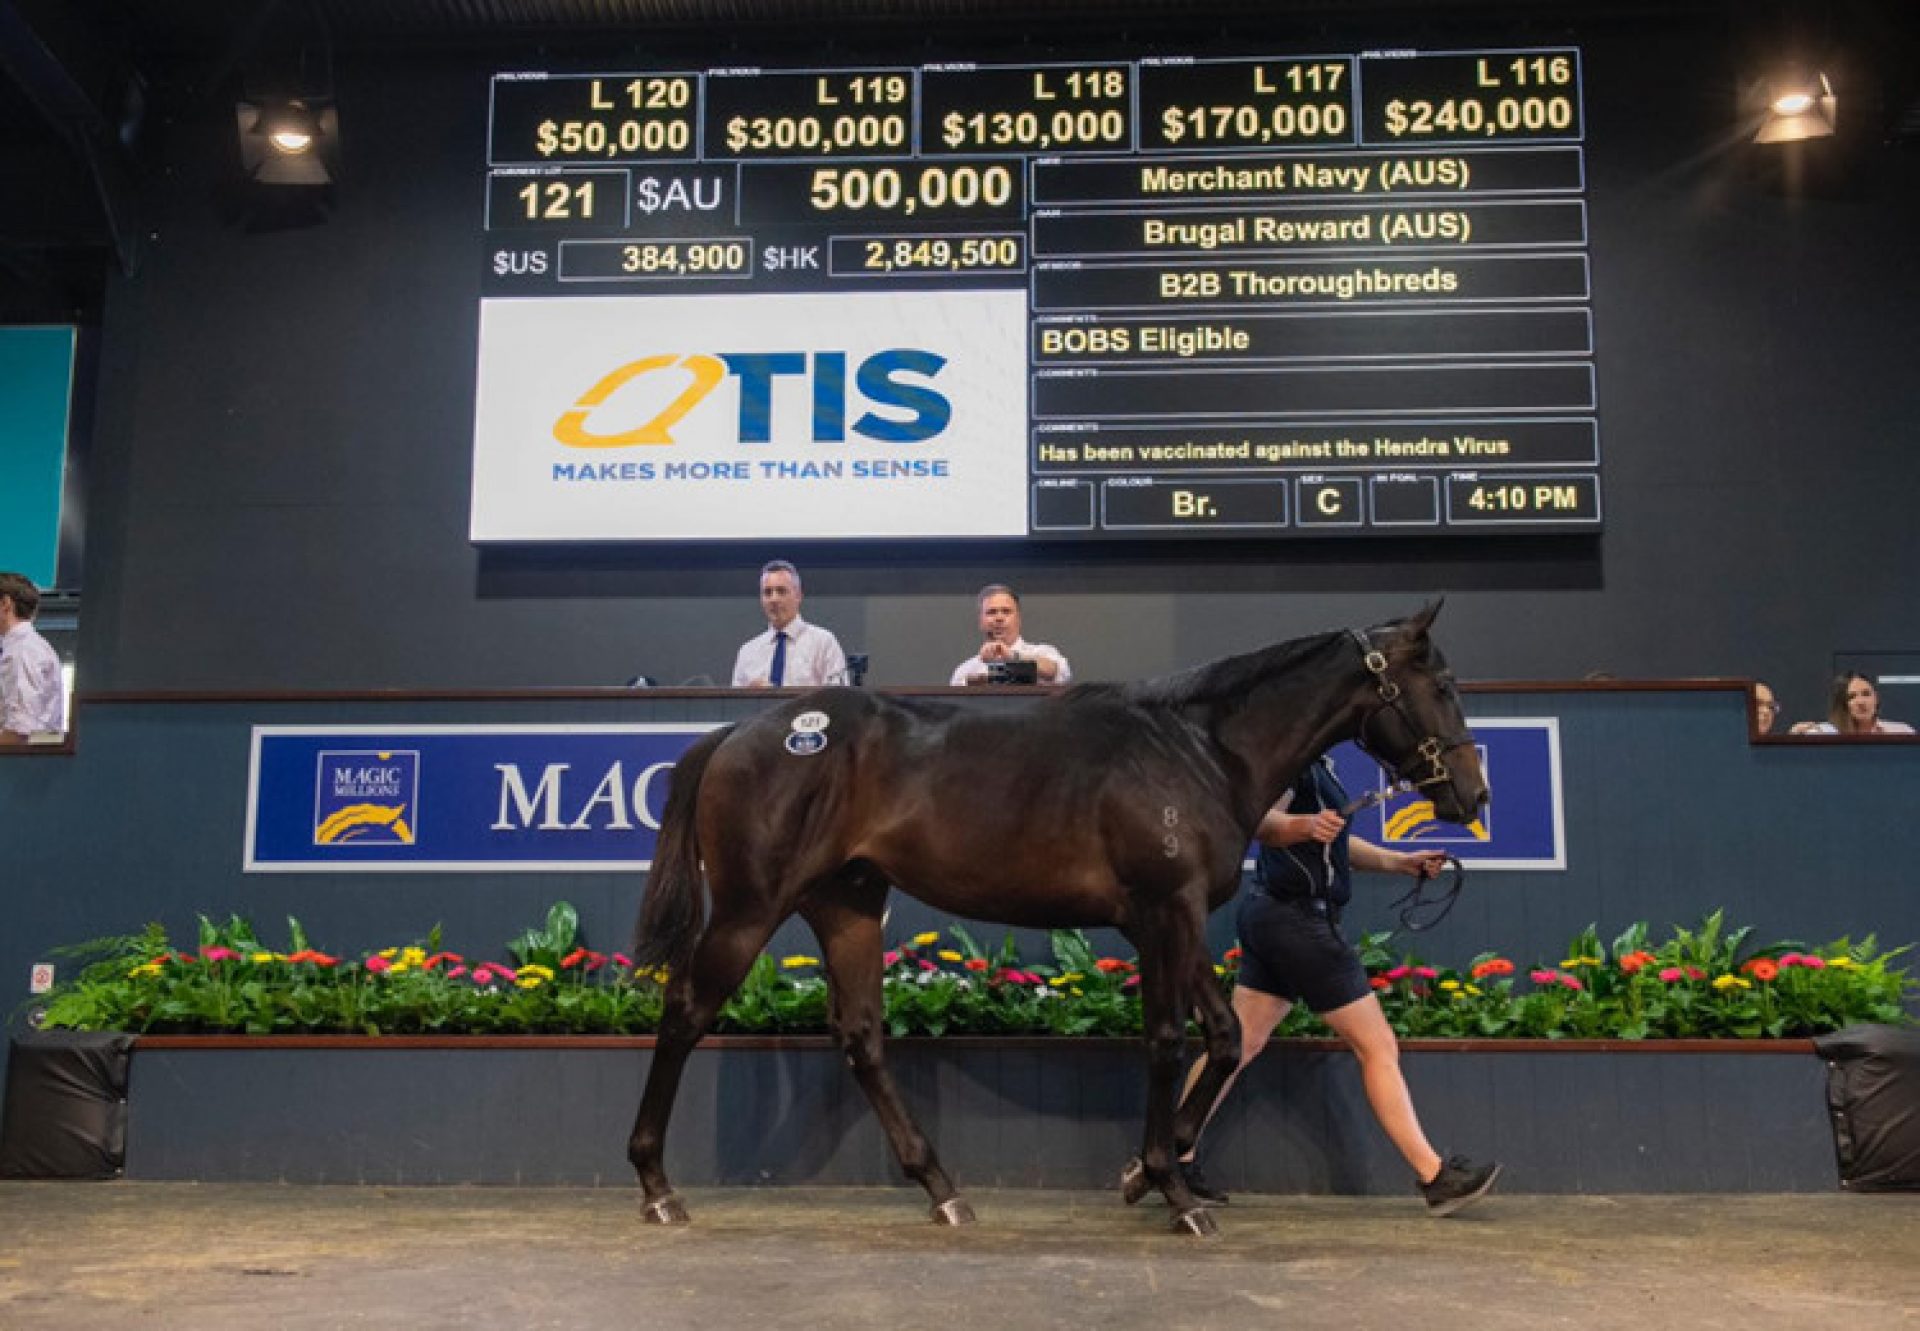 Merchant Navy X Brugal Reward yearling colt selling for $500,000 at the MMGC sale